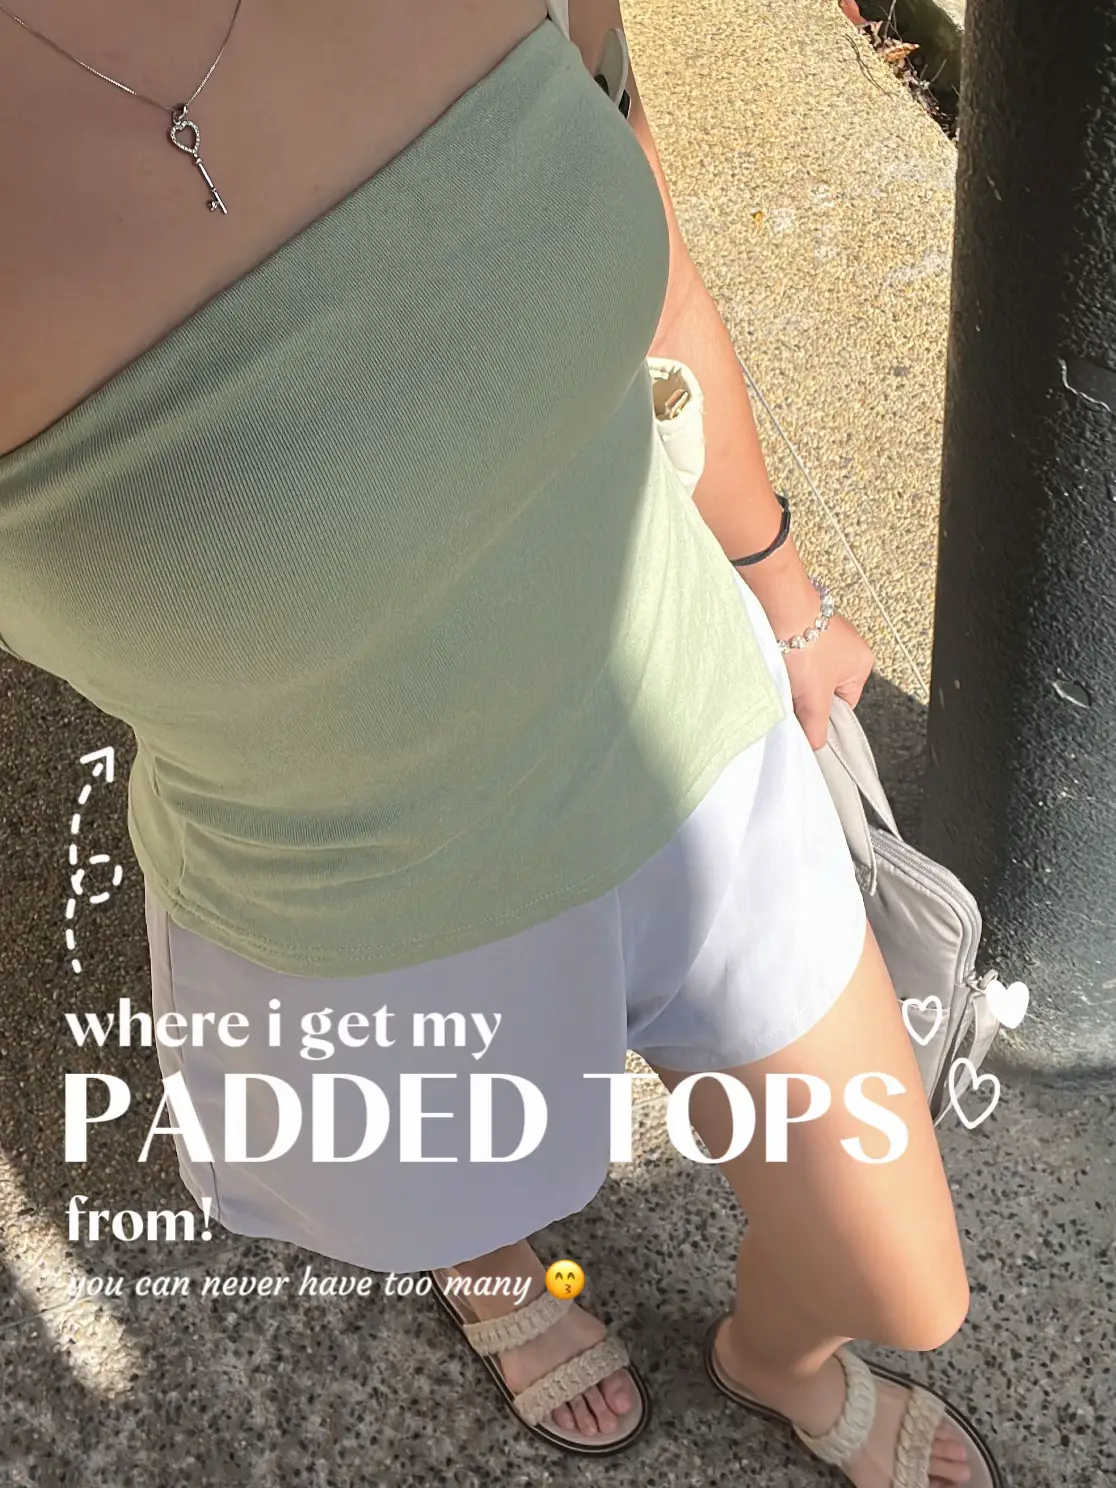 PADDED TOPS ARE SUPERIOR 🤩 MUST-HAVE EVERYDAY TOPS's images